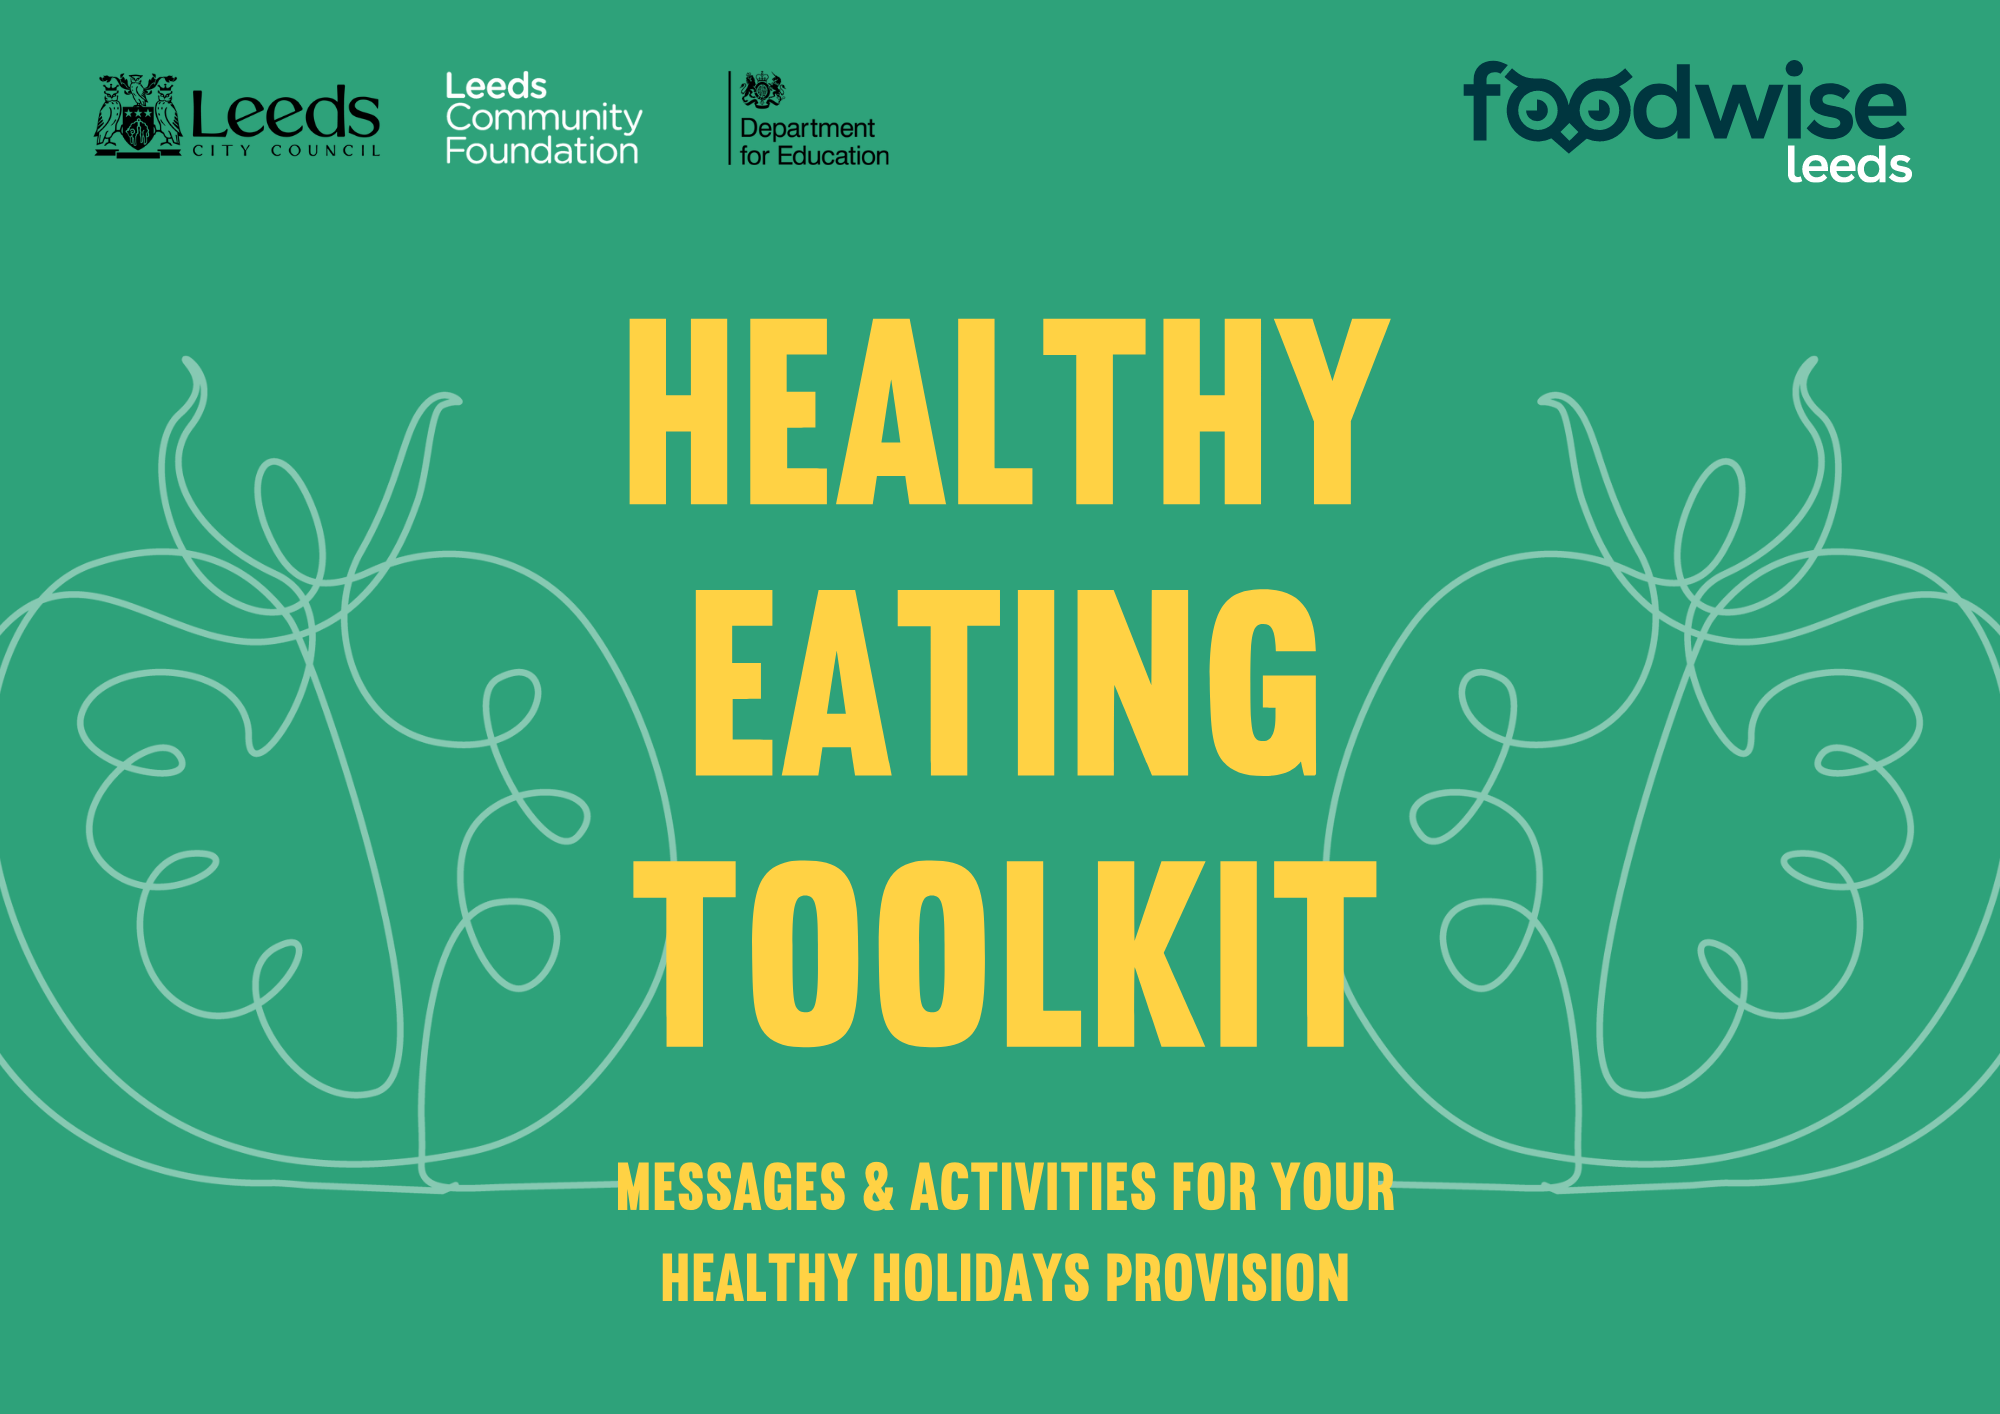 NEW HEALTHY EATING TOOLKIT FOR HEALTHY HOLIDAYS